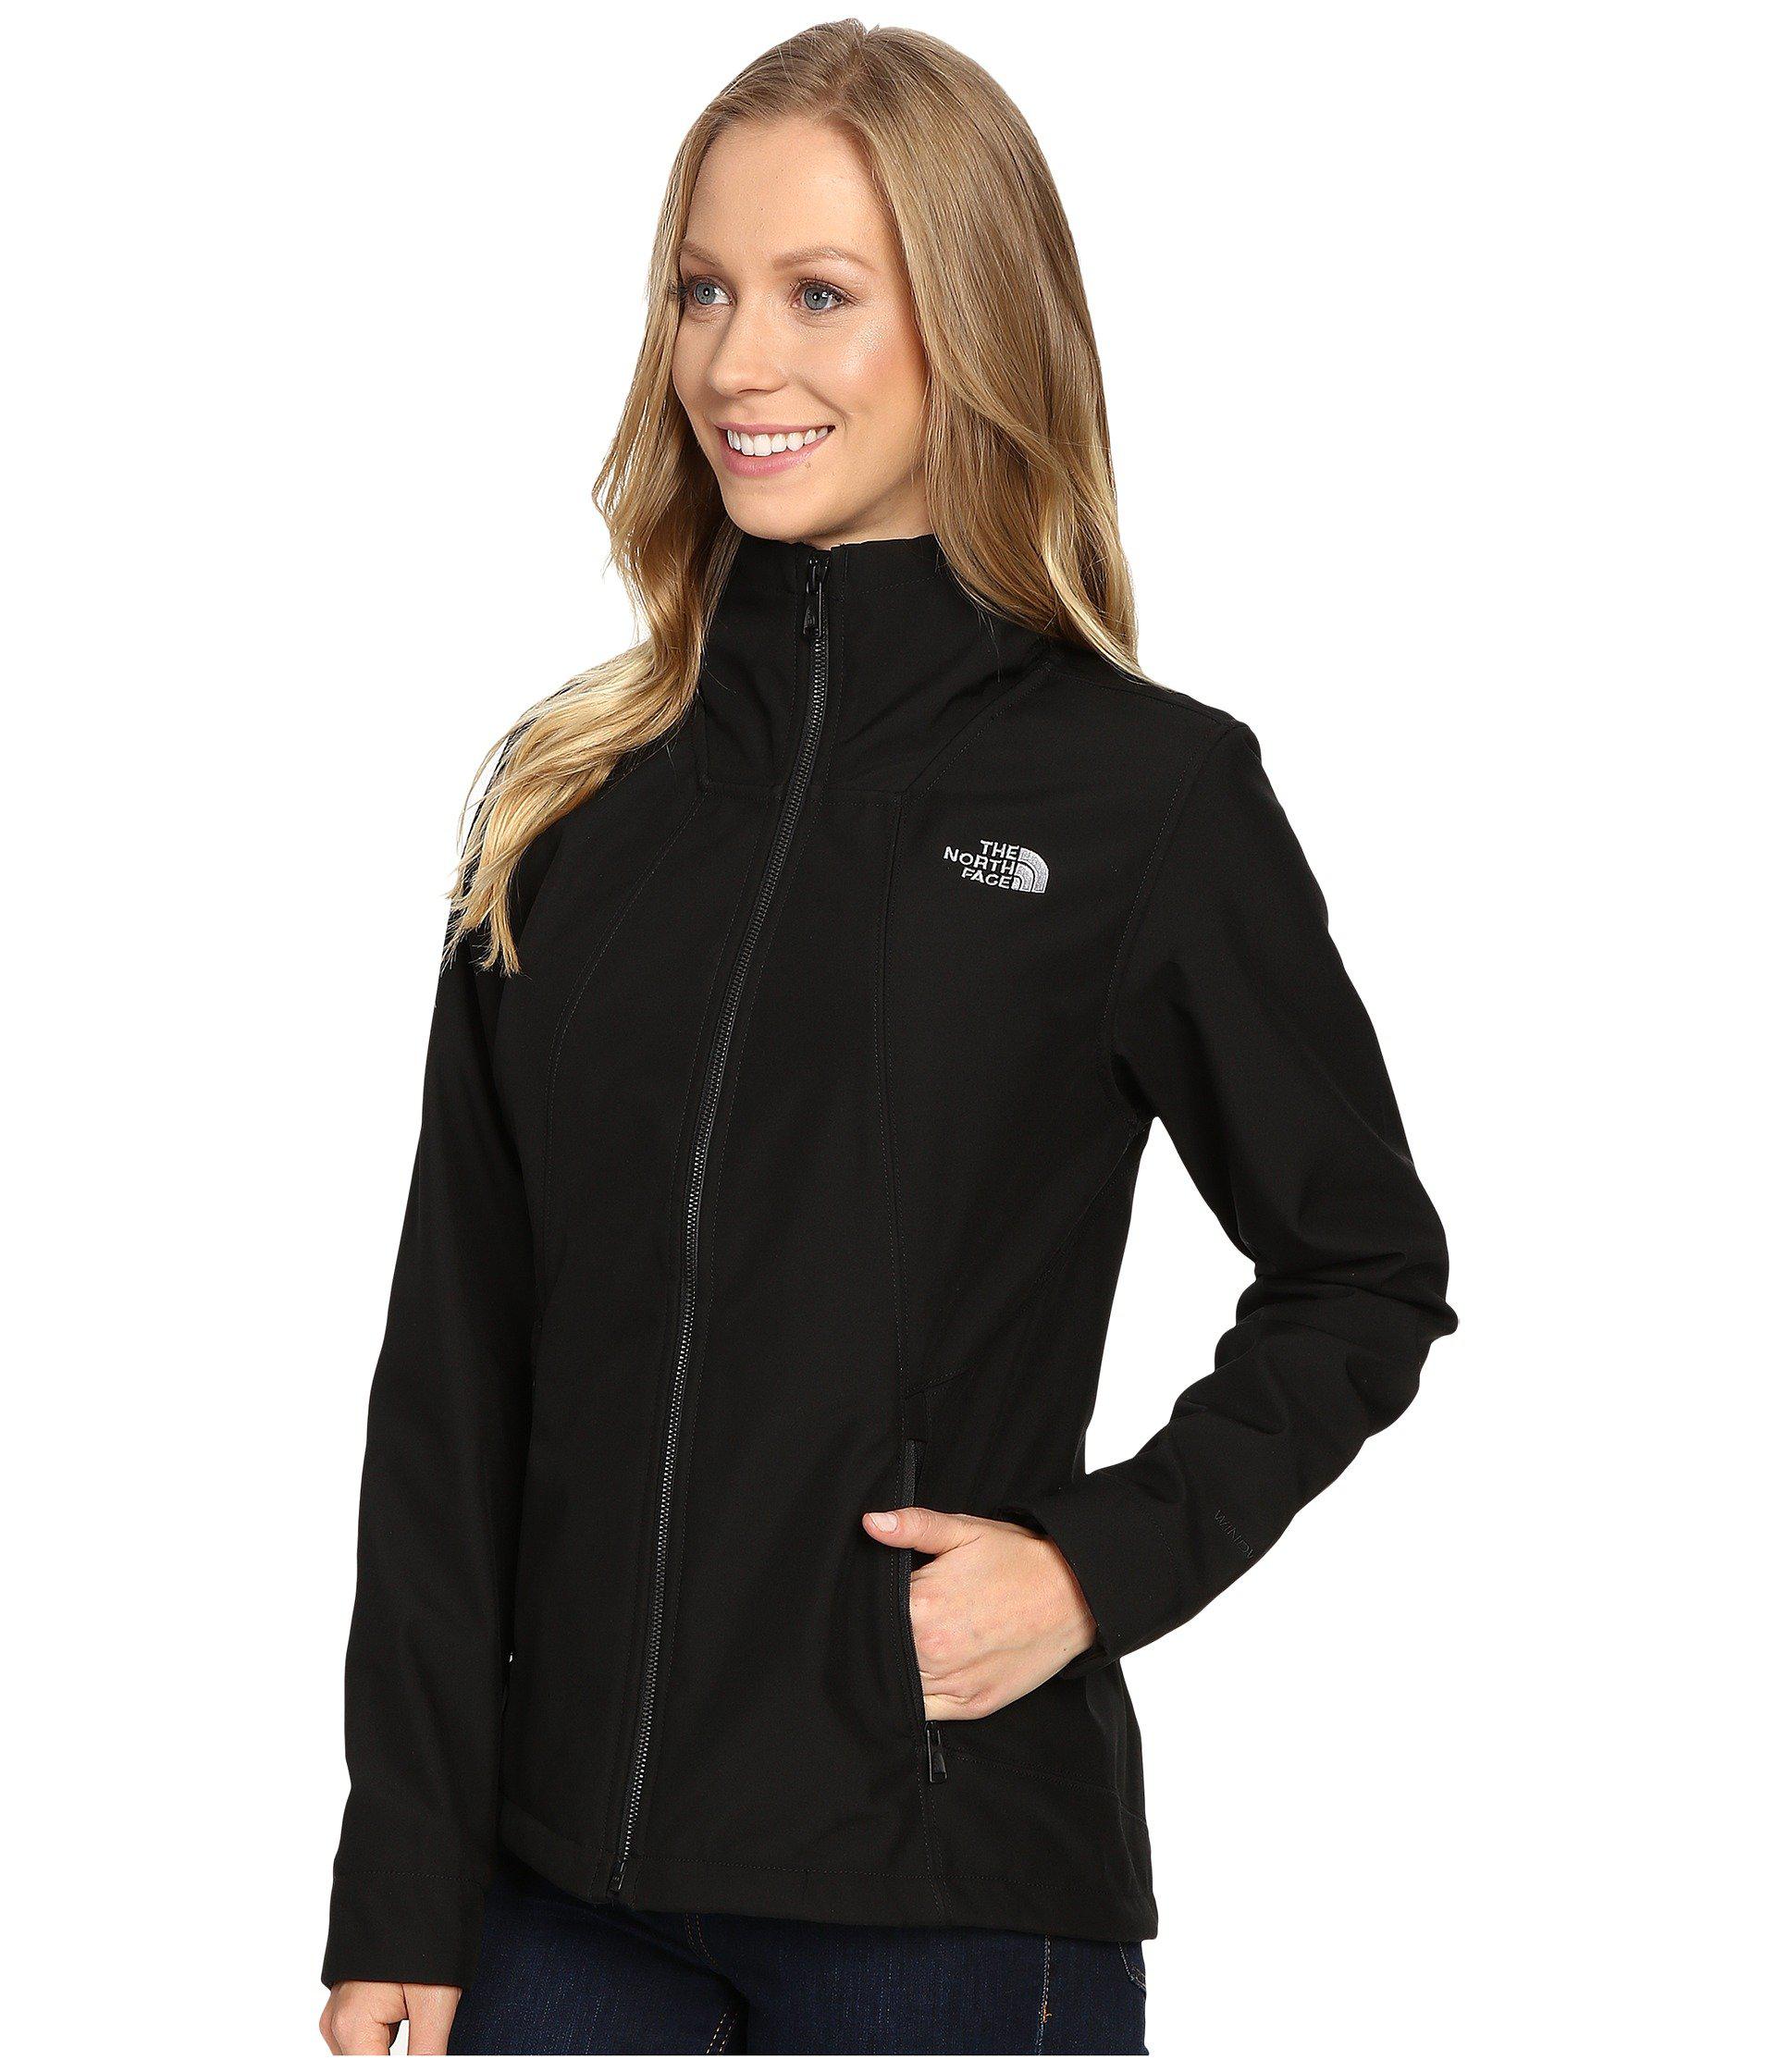 north face thermal jacket women's